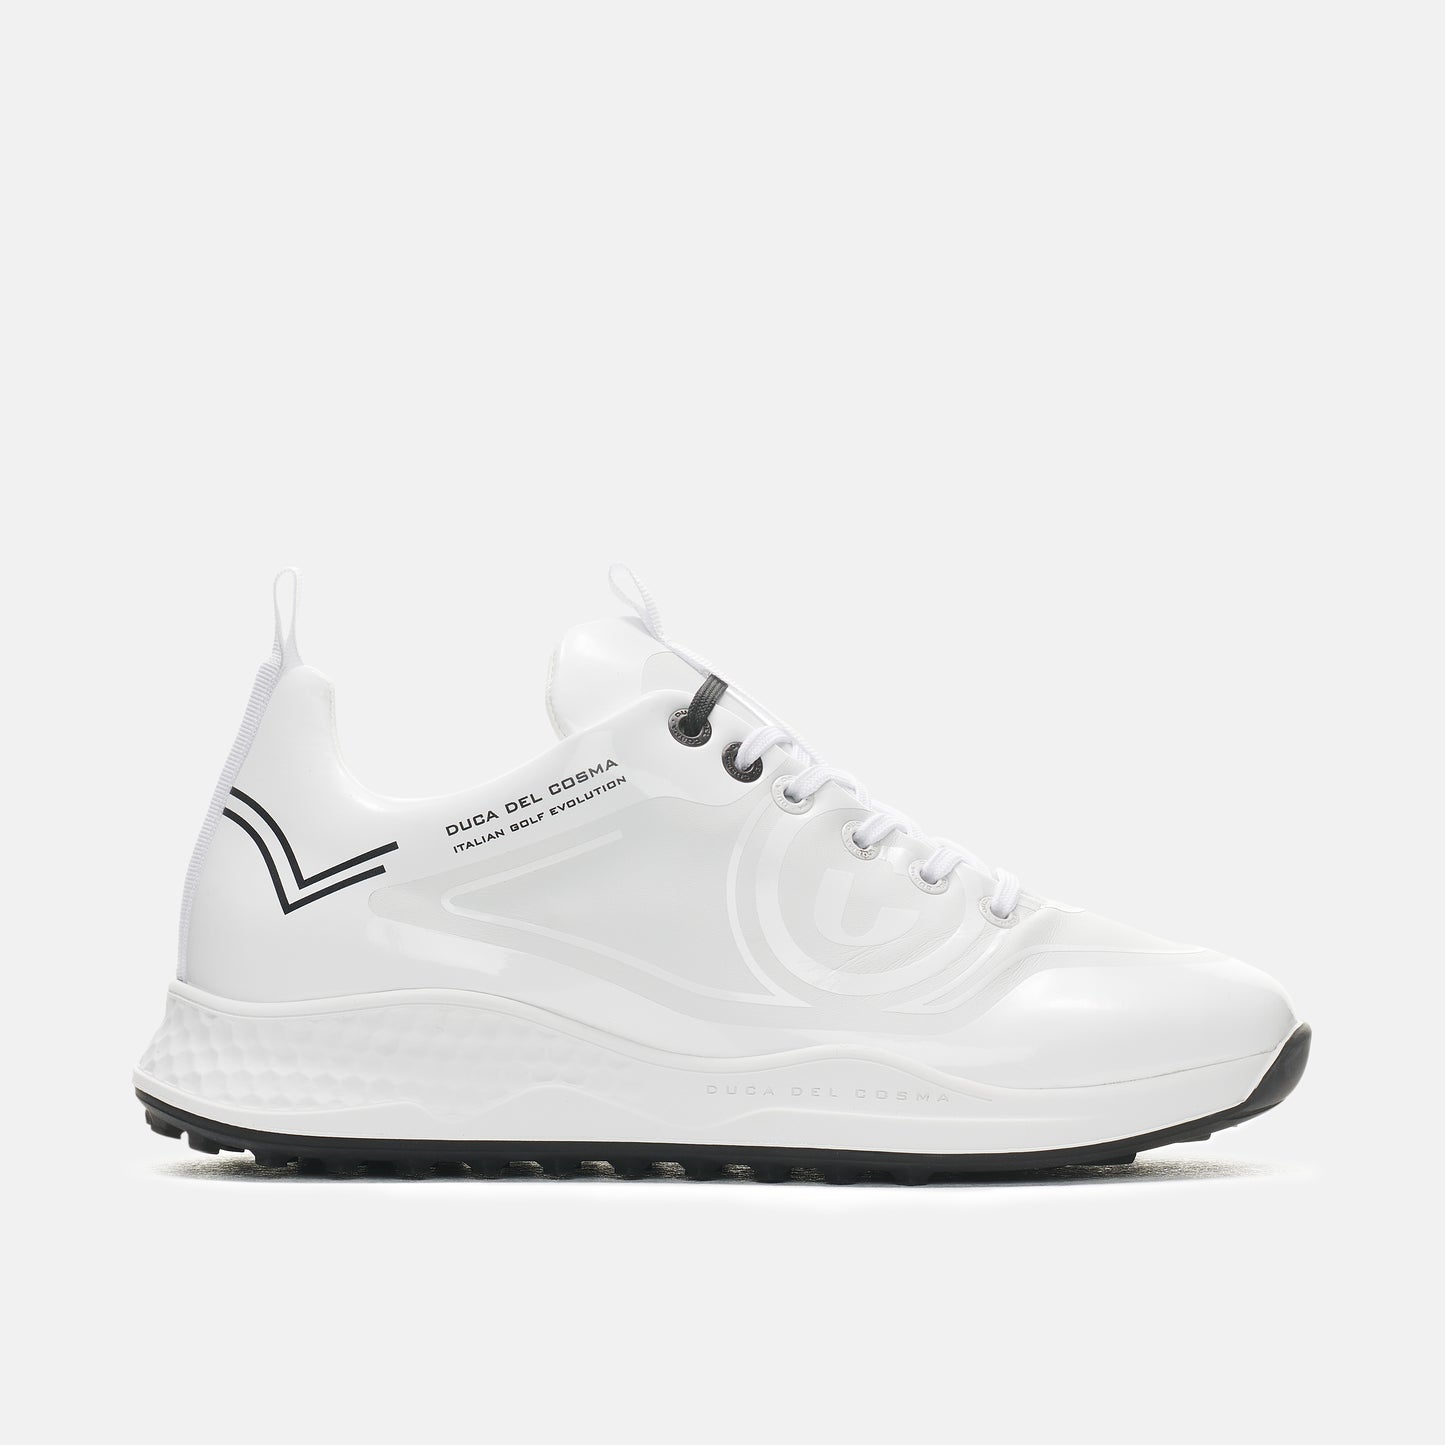 Wildcat White - Womens Golf Shoes